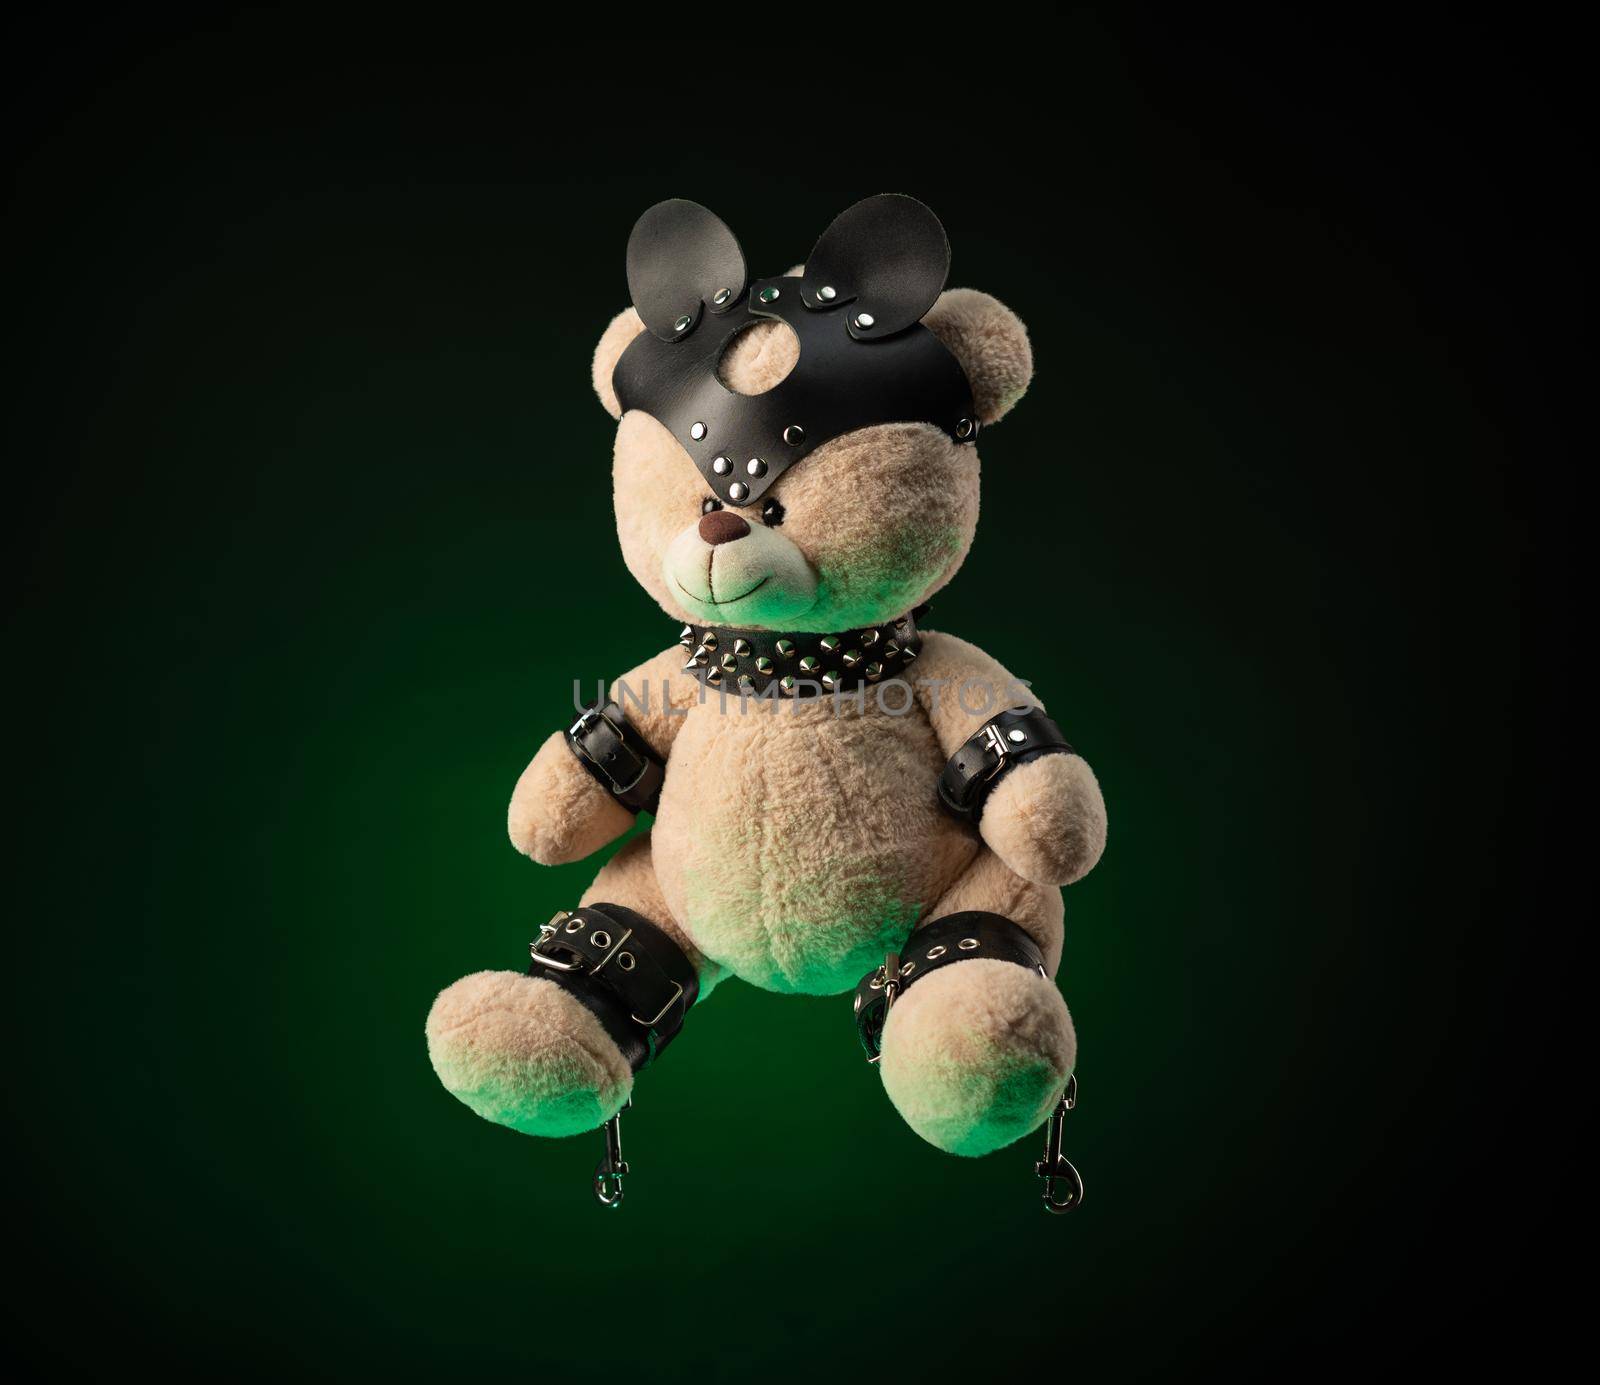 bdsm accessories on a teddy bear by Rotozey